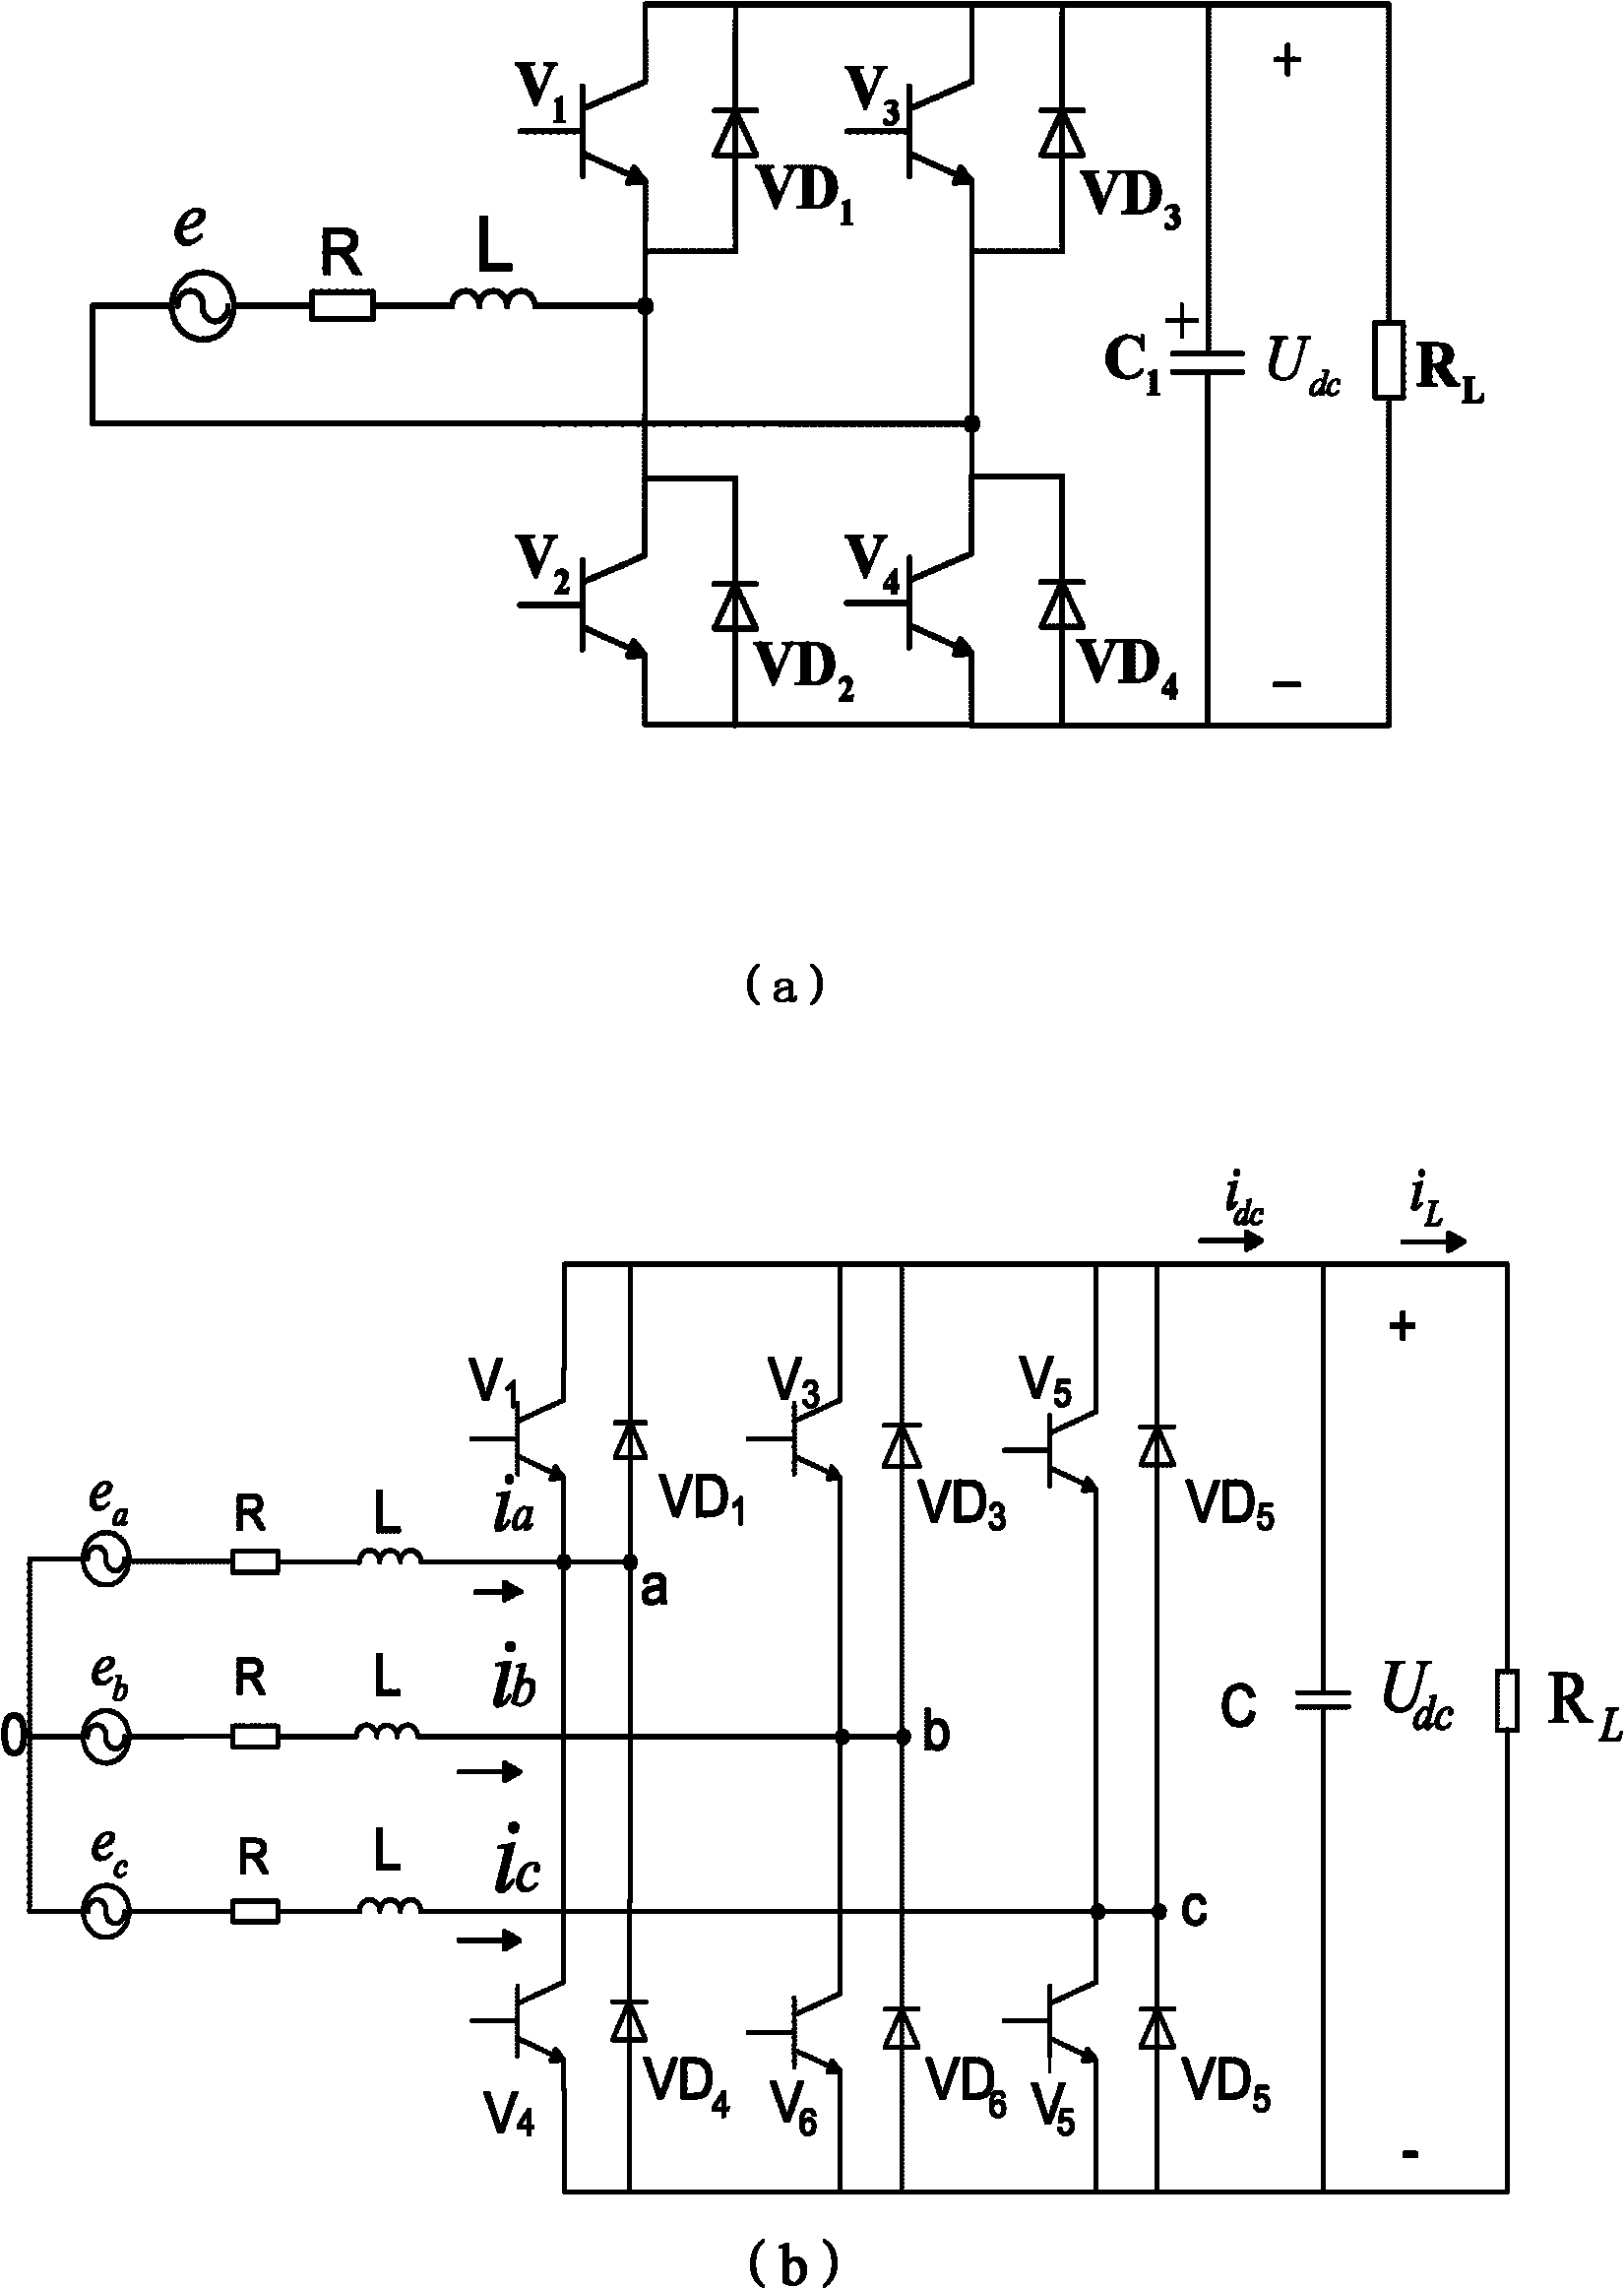 Parallel structure of voltage source type PWM (Pulse Width Modulation) rectifier and control method of the rectifier